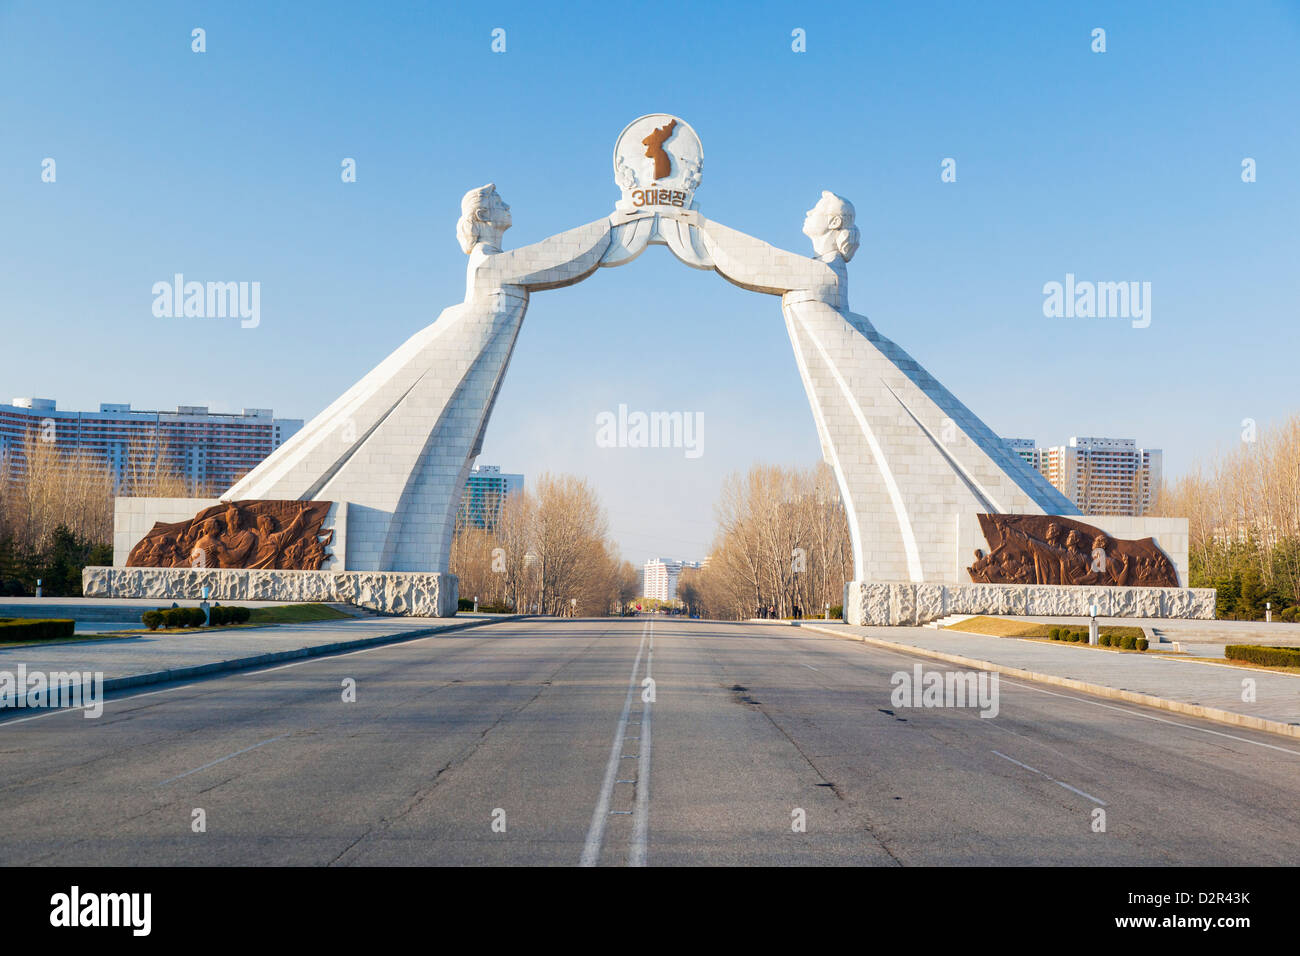 Monument to the Three Charters of National Reunification, Pyongyang, North Korea Stock Photo